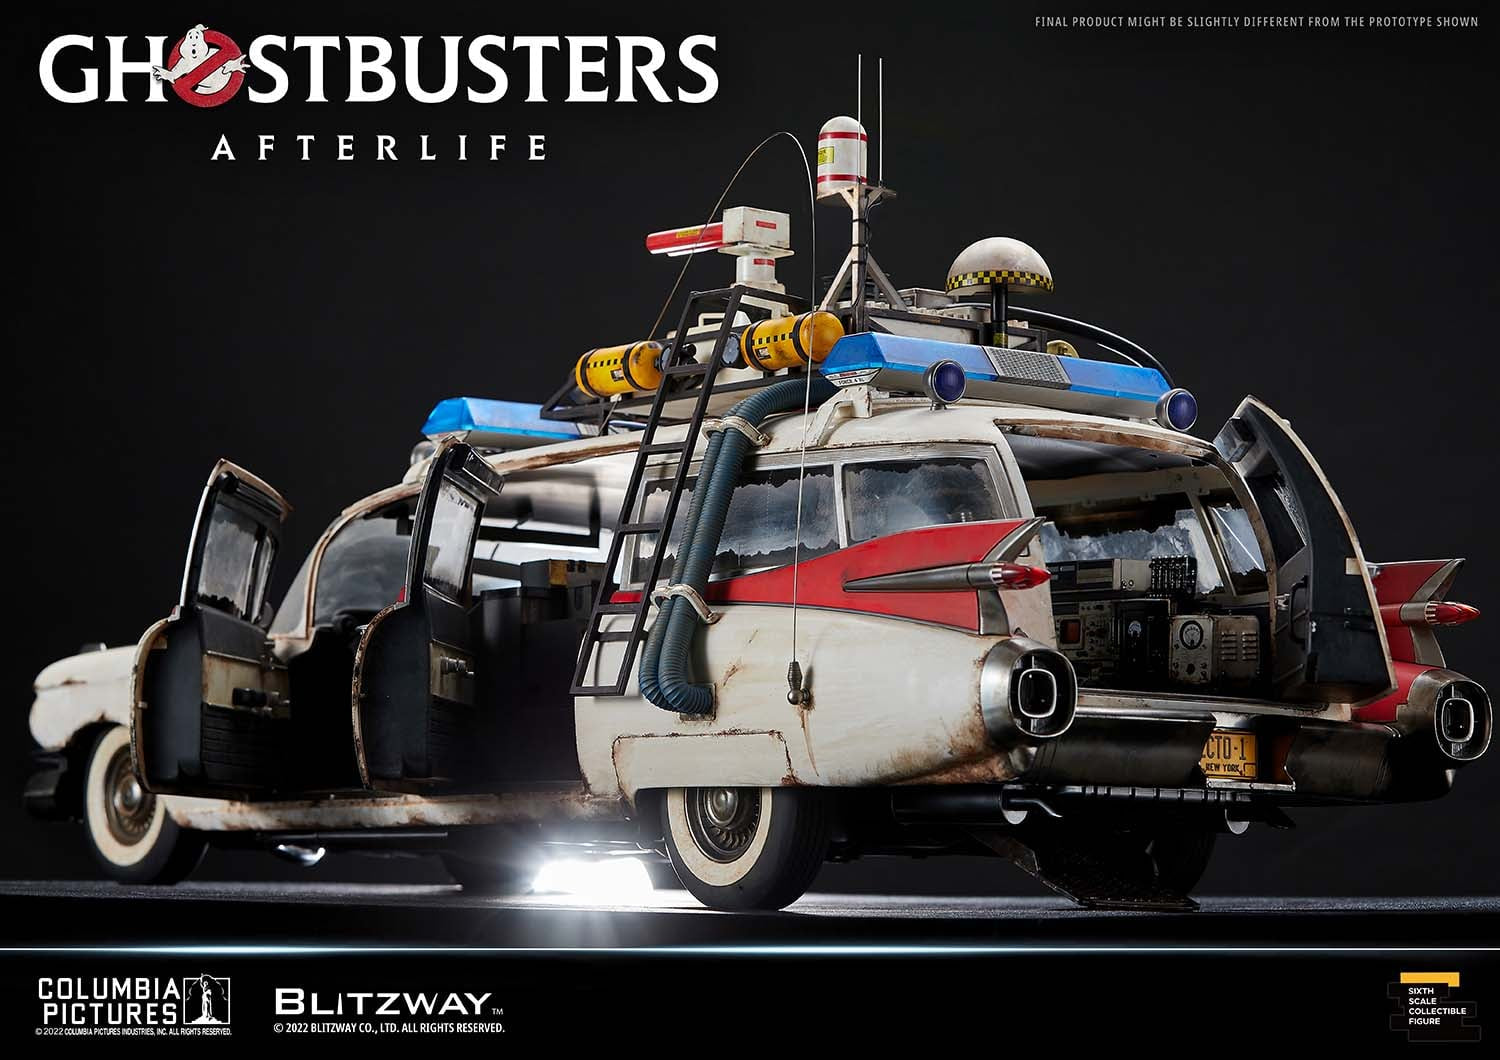 Ghostbusters Afterlife - ECTO-1 1/6 Scale - Spec Fiction Shop